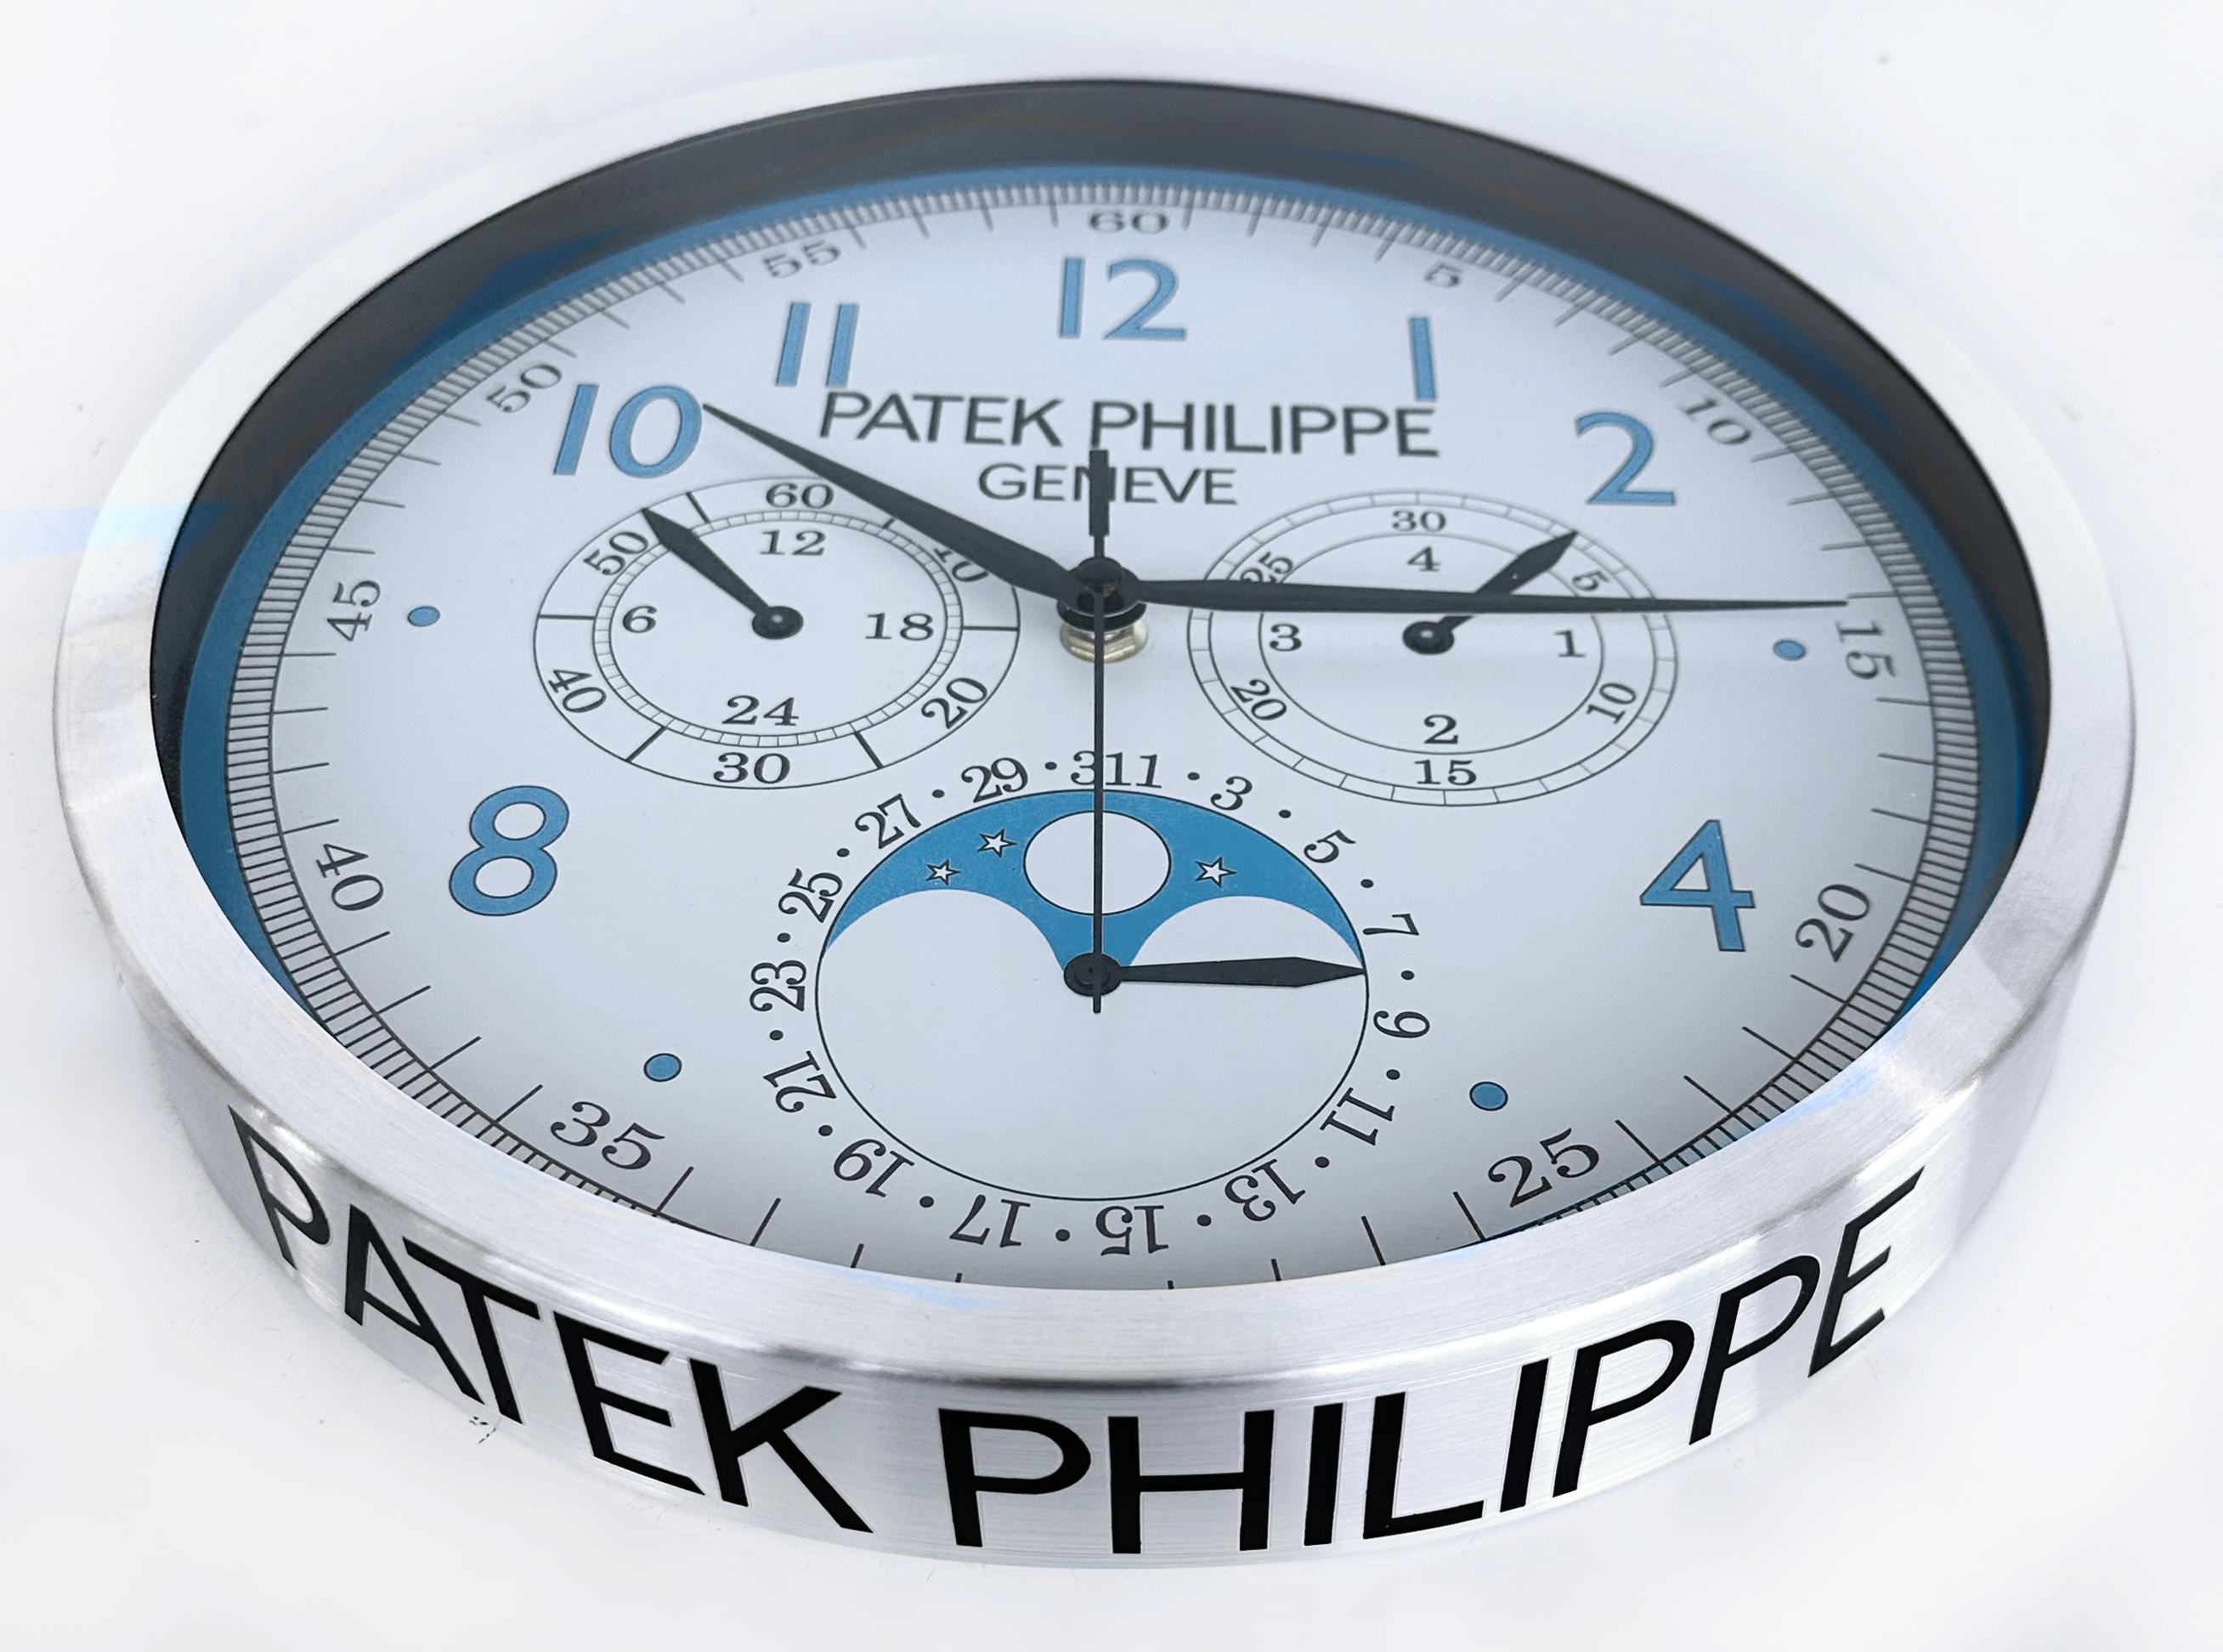 Patek Philippe, Switzerland dealer's advertising wall clock.


Offered for sale is a Patek Philippe (Geneve, Switzerland) dealer's advertising chronograph wall clock of a wristwatch model. This is a great gift for the watch lover. This is